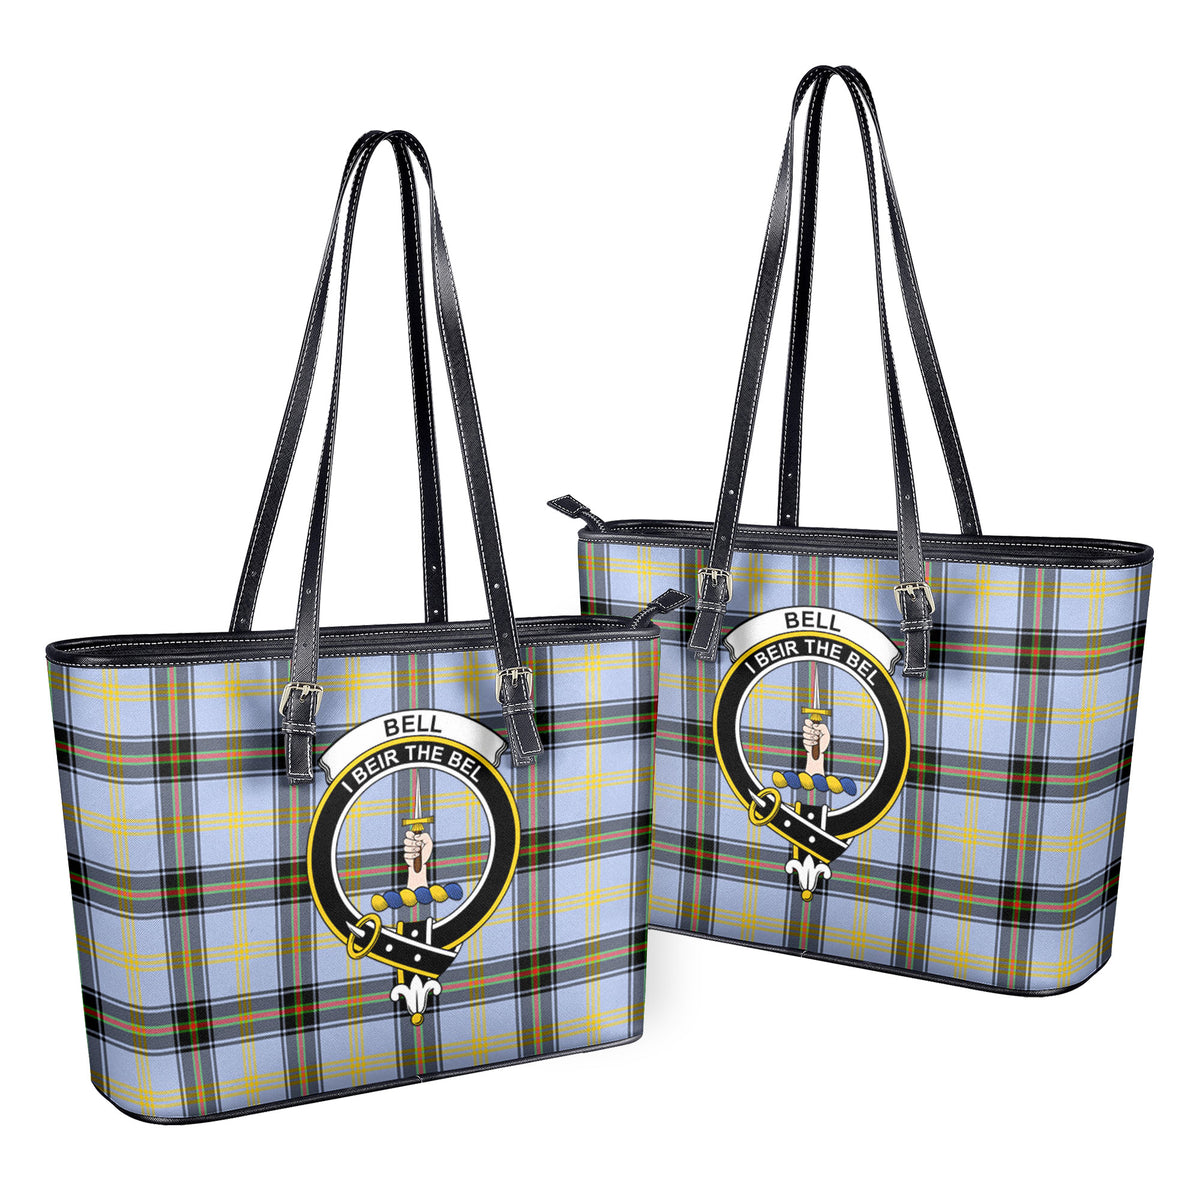 Bell of the Borders Tartan Crest Leather Tote Bag